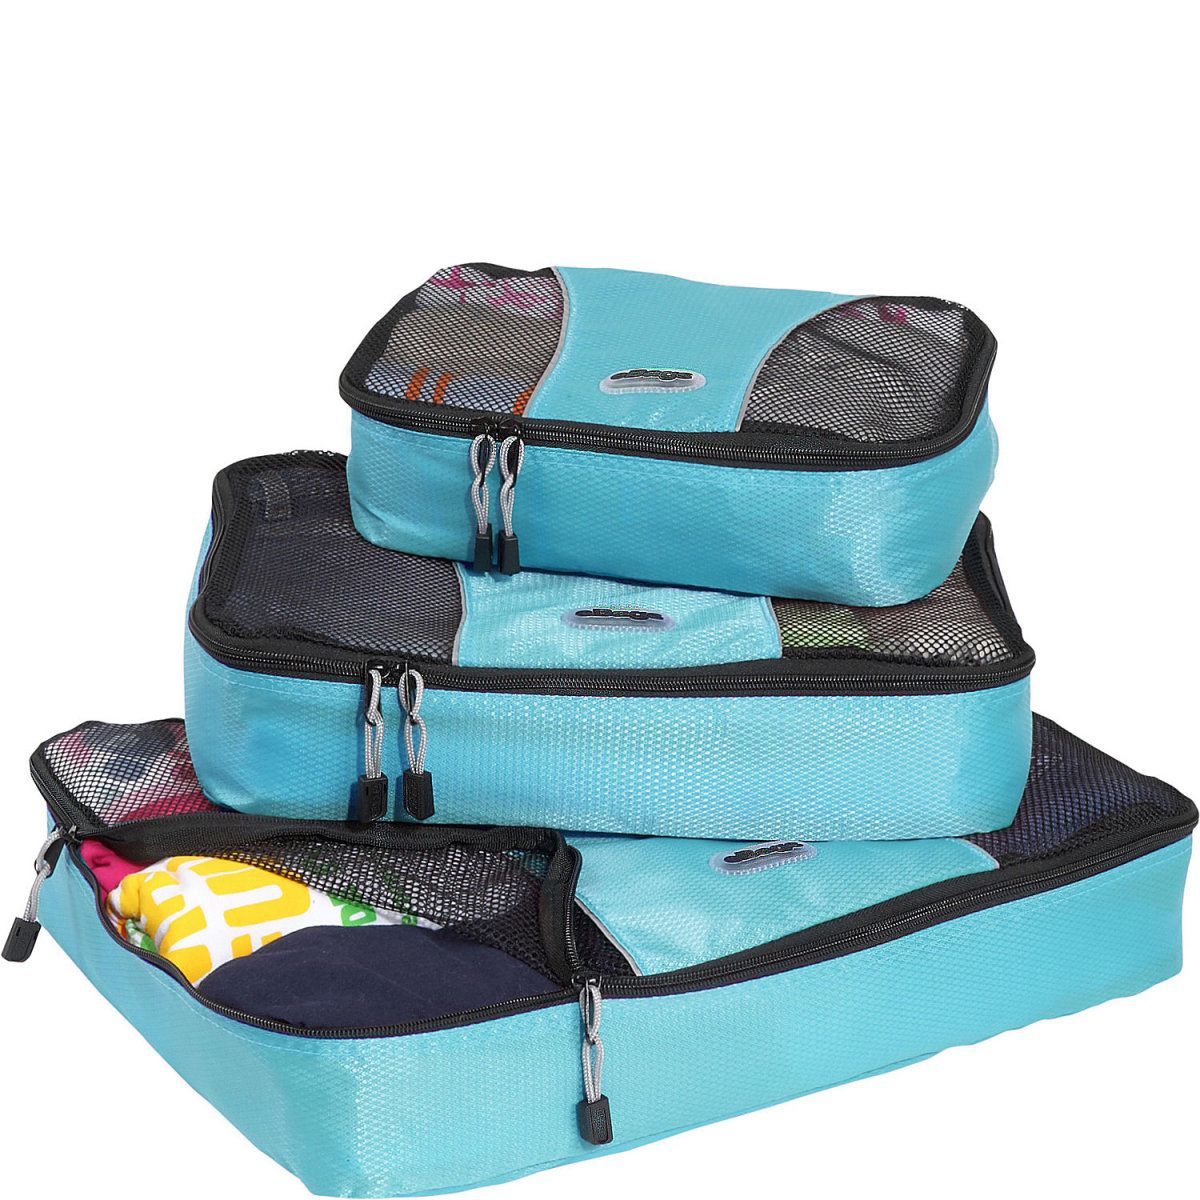 Packing tips: Packing cubes keep you organized.